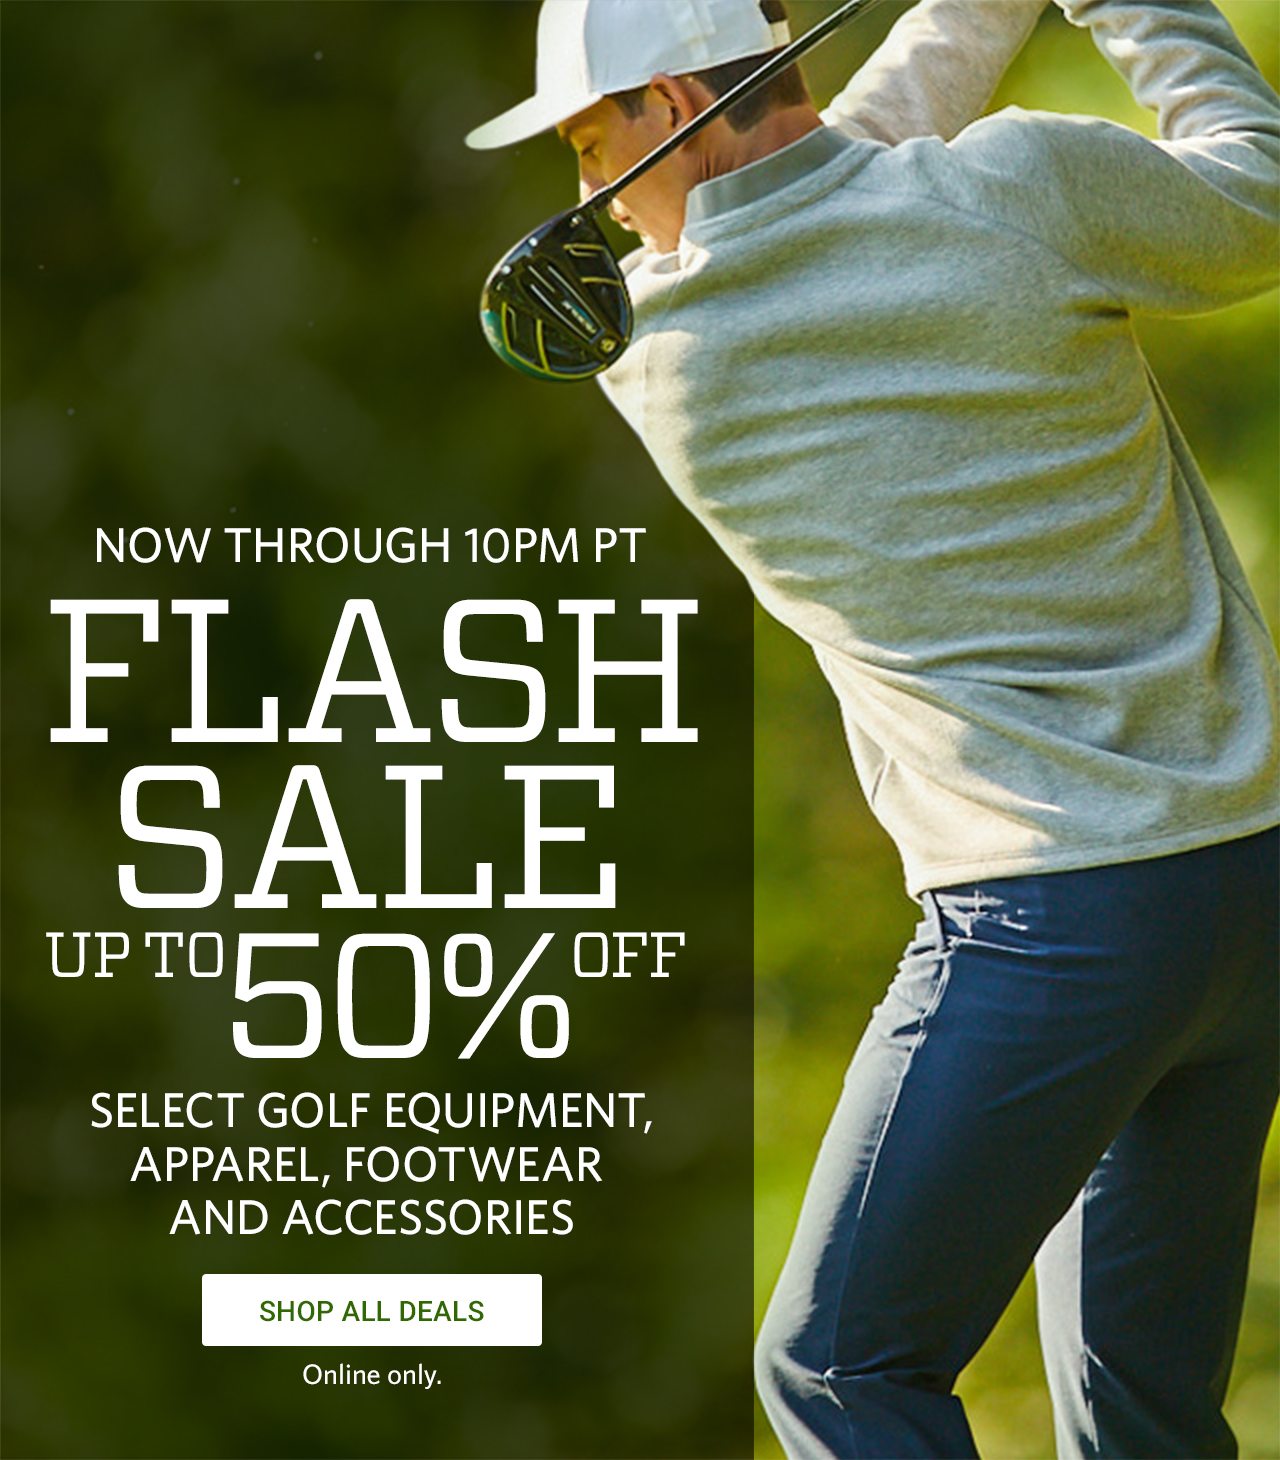 Now Through 10PM PT, Flash Sale, Up To 50% Off Select Golf Equipment, Apparel, Footwear and Accessories. Shop All Deals. Online Only.